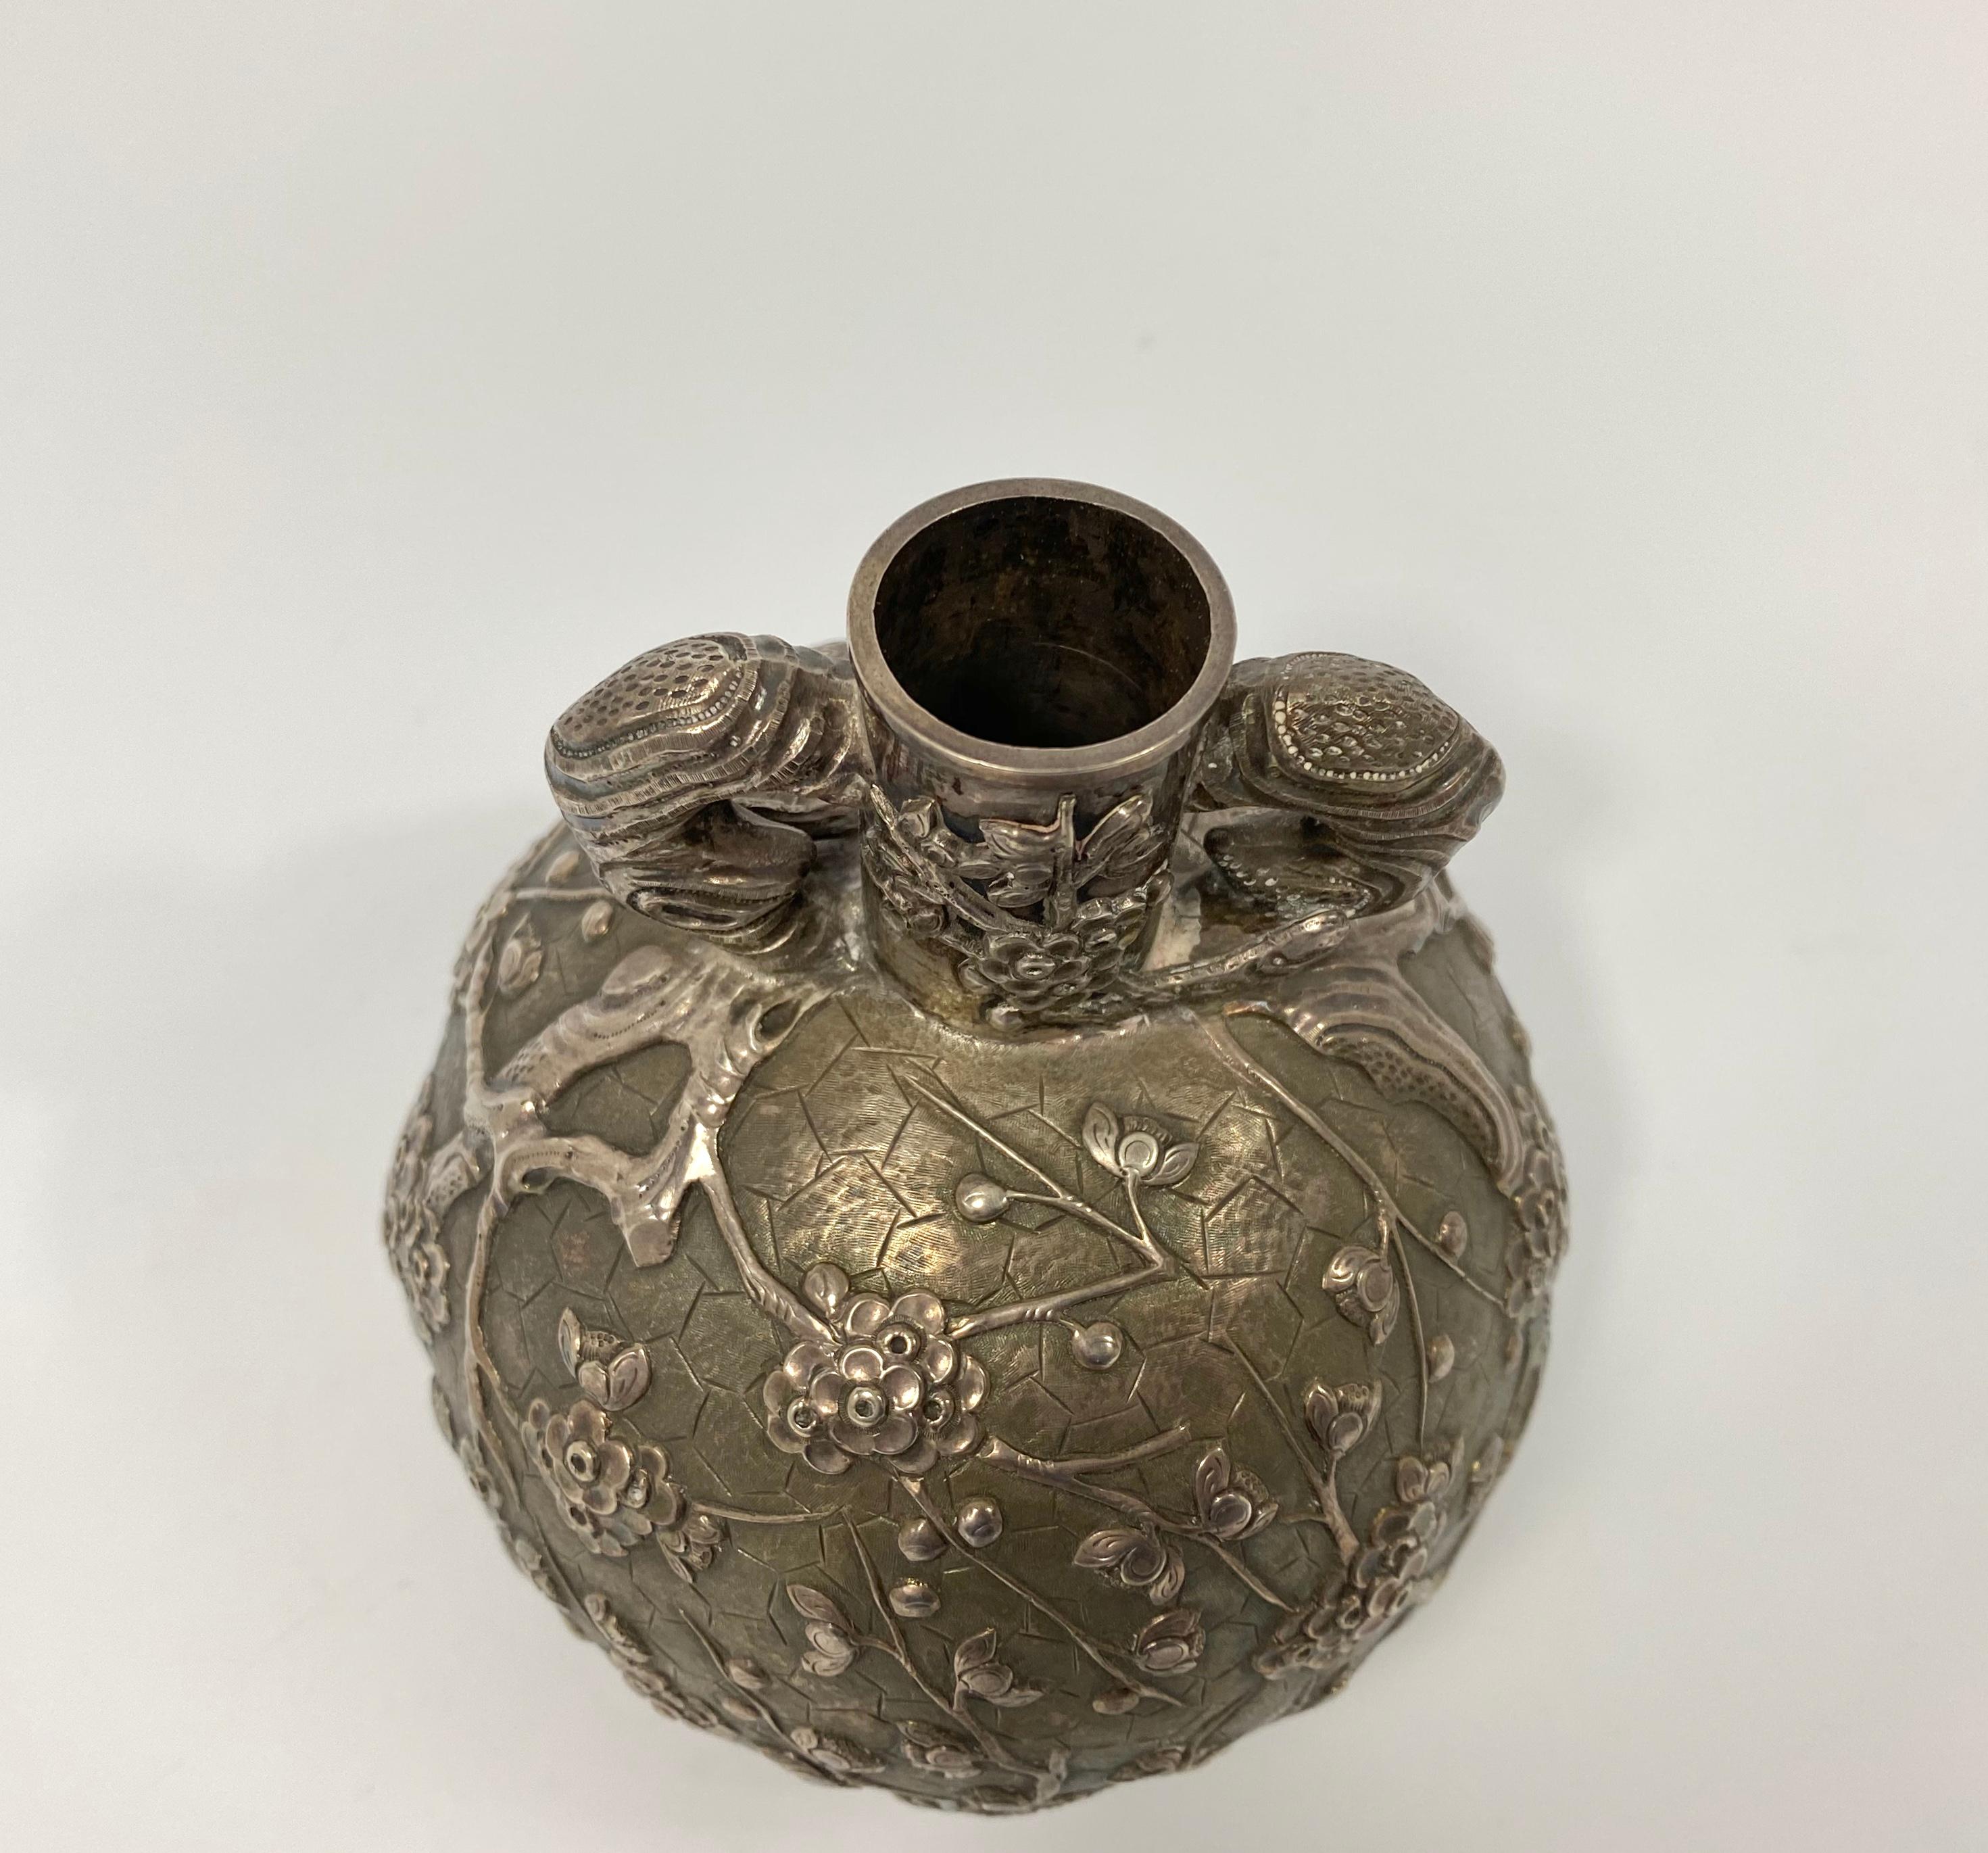 Chinese Silver Flask ‘Cherry blossom on a cracked ice ground’, Luen Wo, Shanghai 3